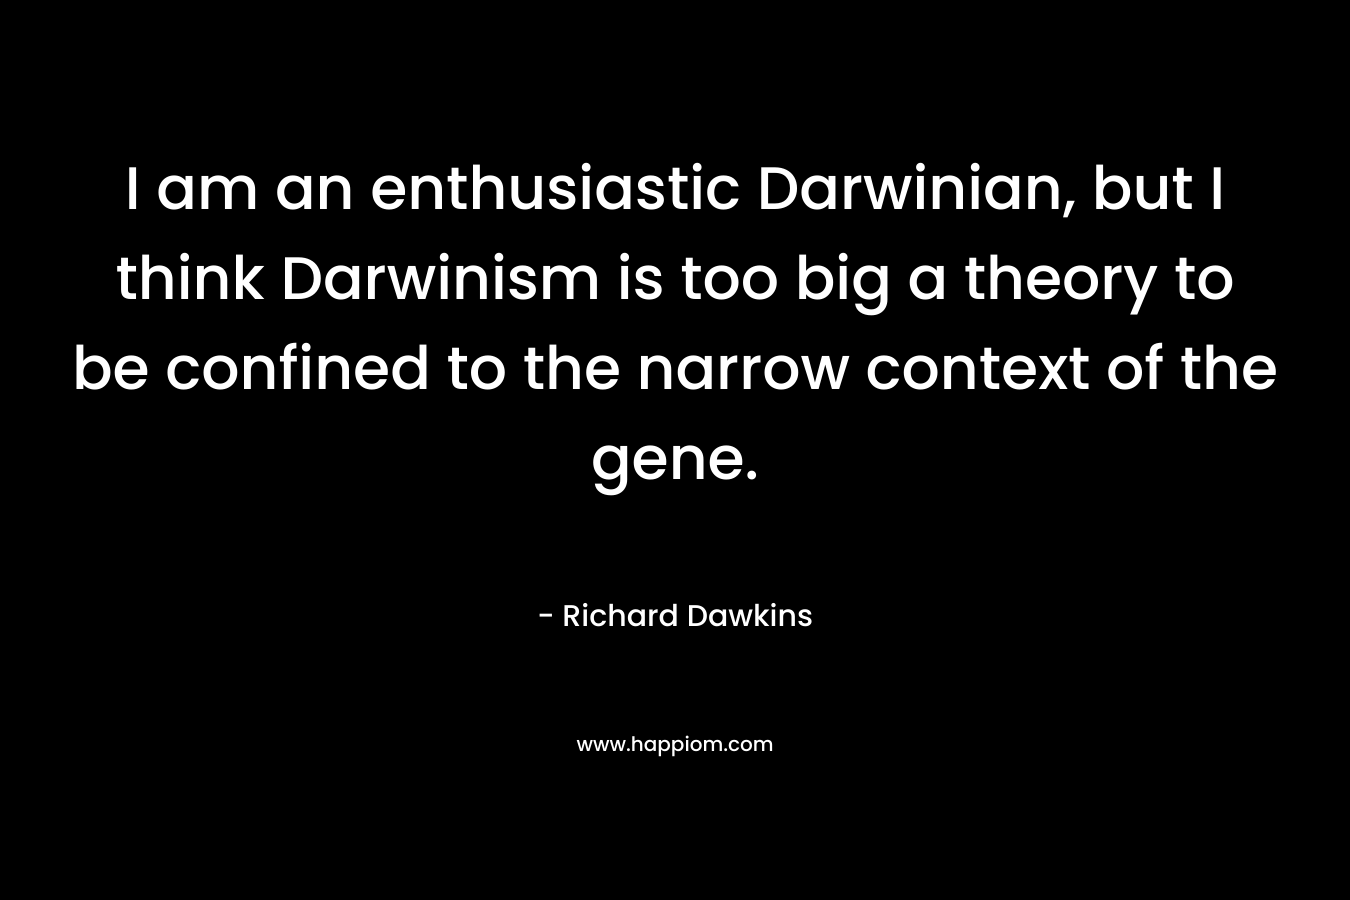 I am an enthusiastic Darwinian, but I think Darwinism is too big a theory to be confined to the narrow context of the gene. – Richard Dawkins